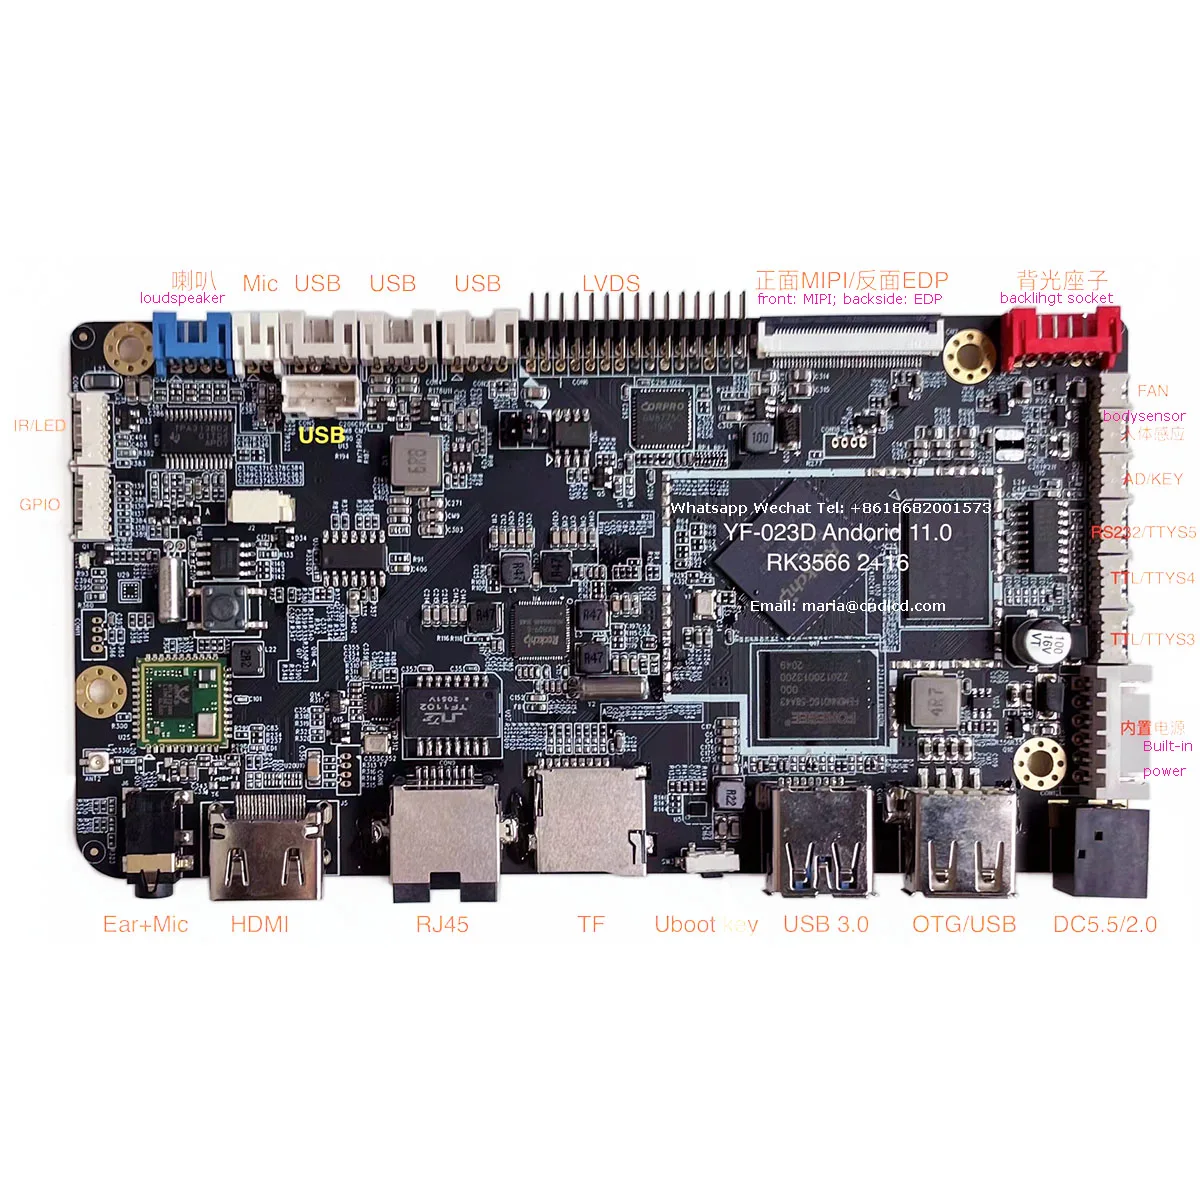 

Android 11.0 embedded linux OS Ubuntu RK3566 2G+16G advertisement Dispenser android tablet development driver motherboard board